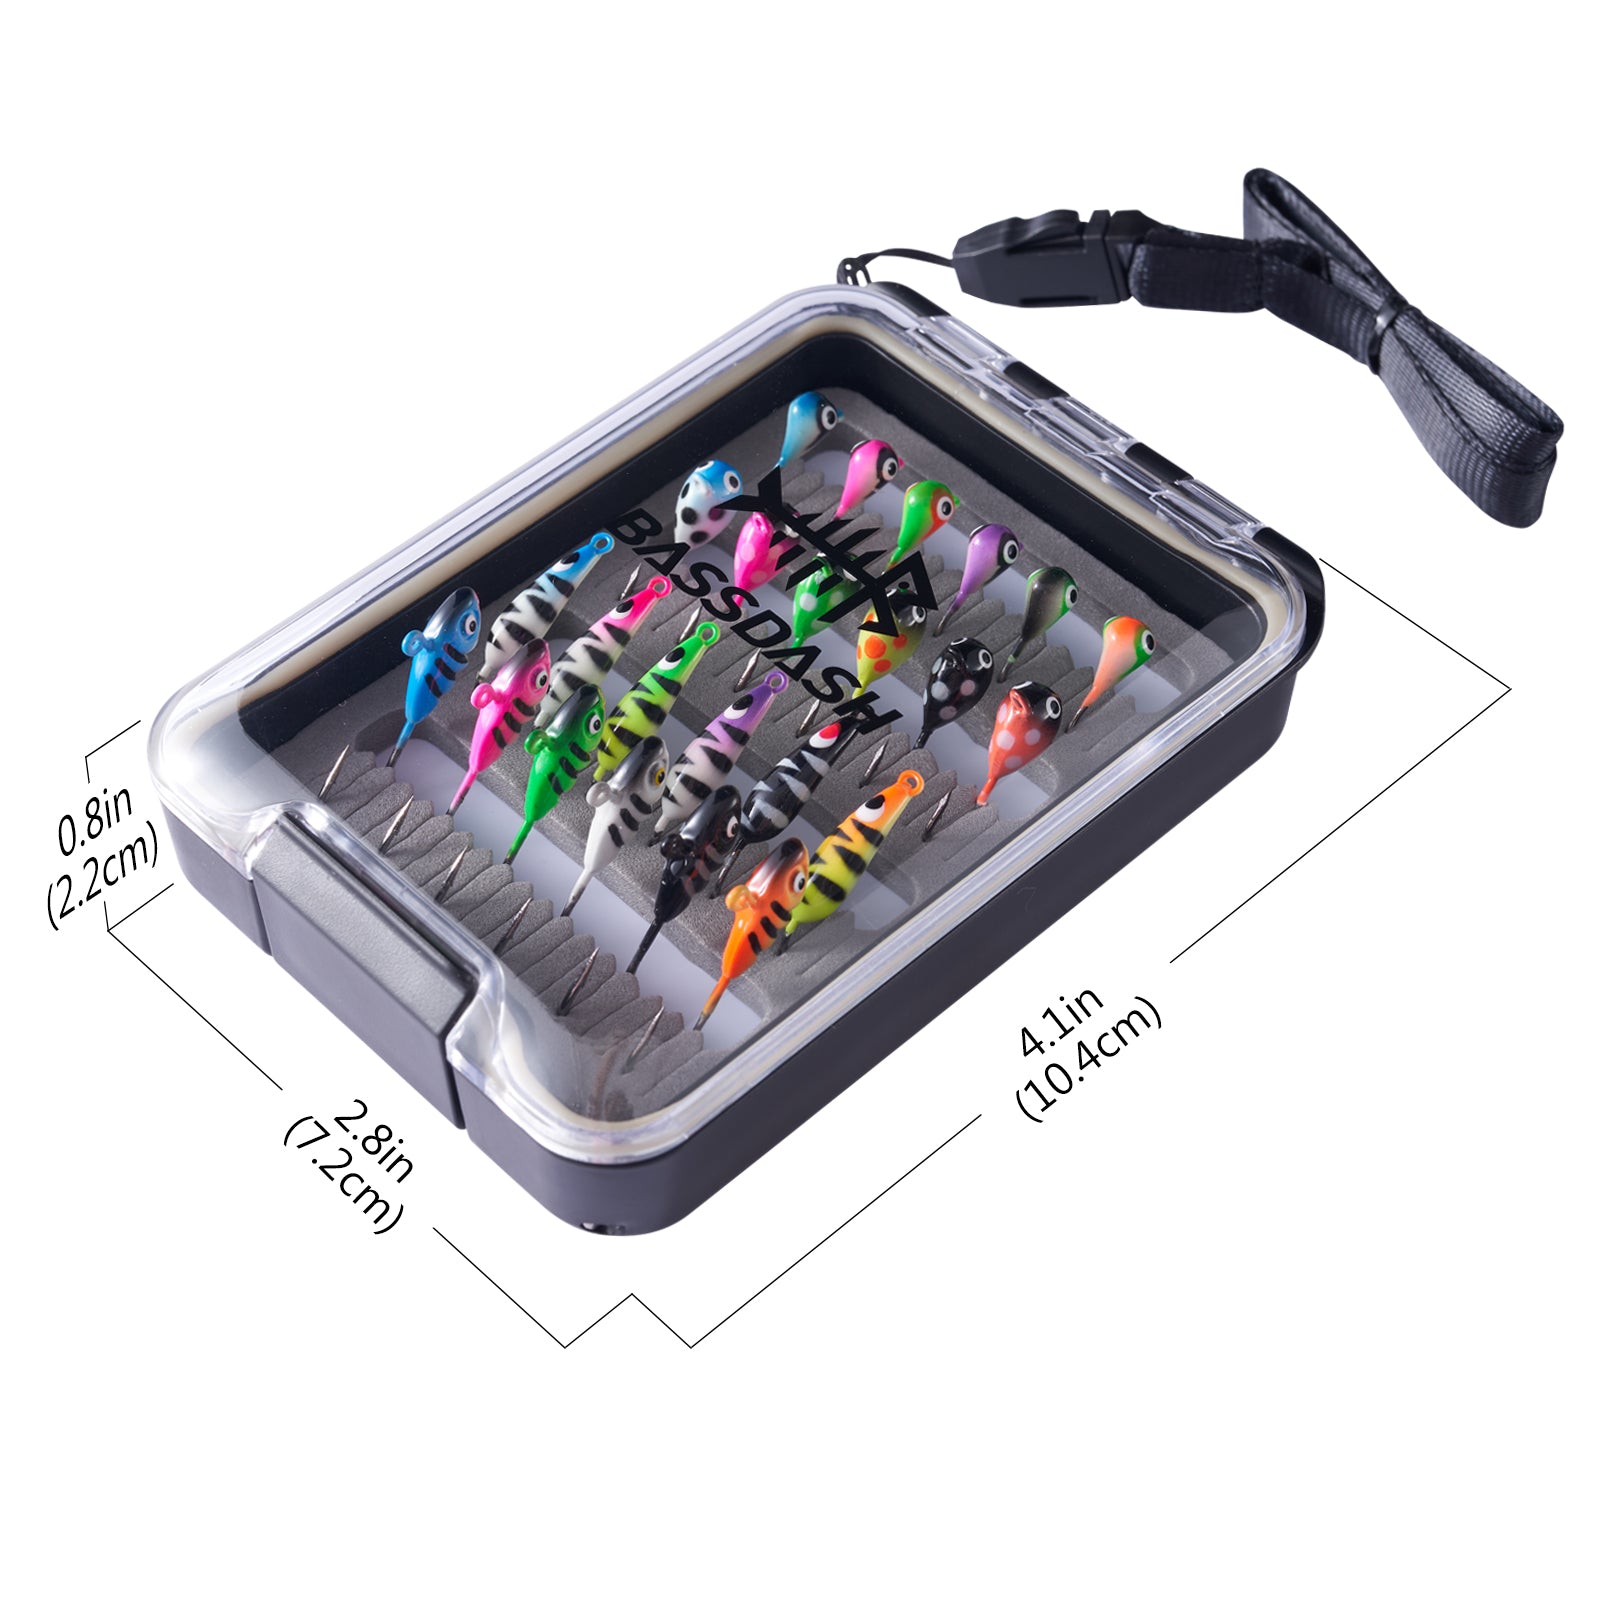 Tungsten Ice Fishing Jig Kit 20 Ice Fishing Lures With Waterproof Jig Box  Crappie Walleye Panfish Bass Perch, UV Glow and Standard Colors 